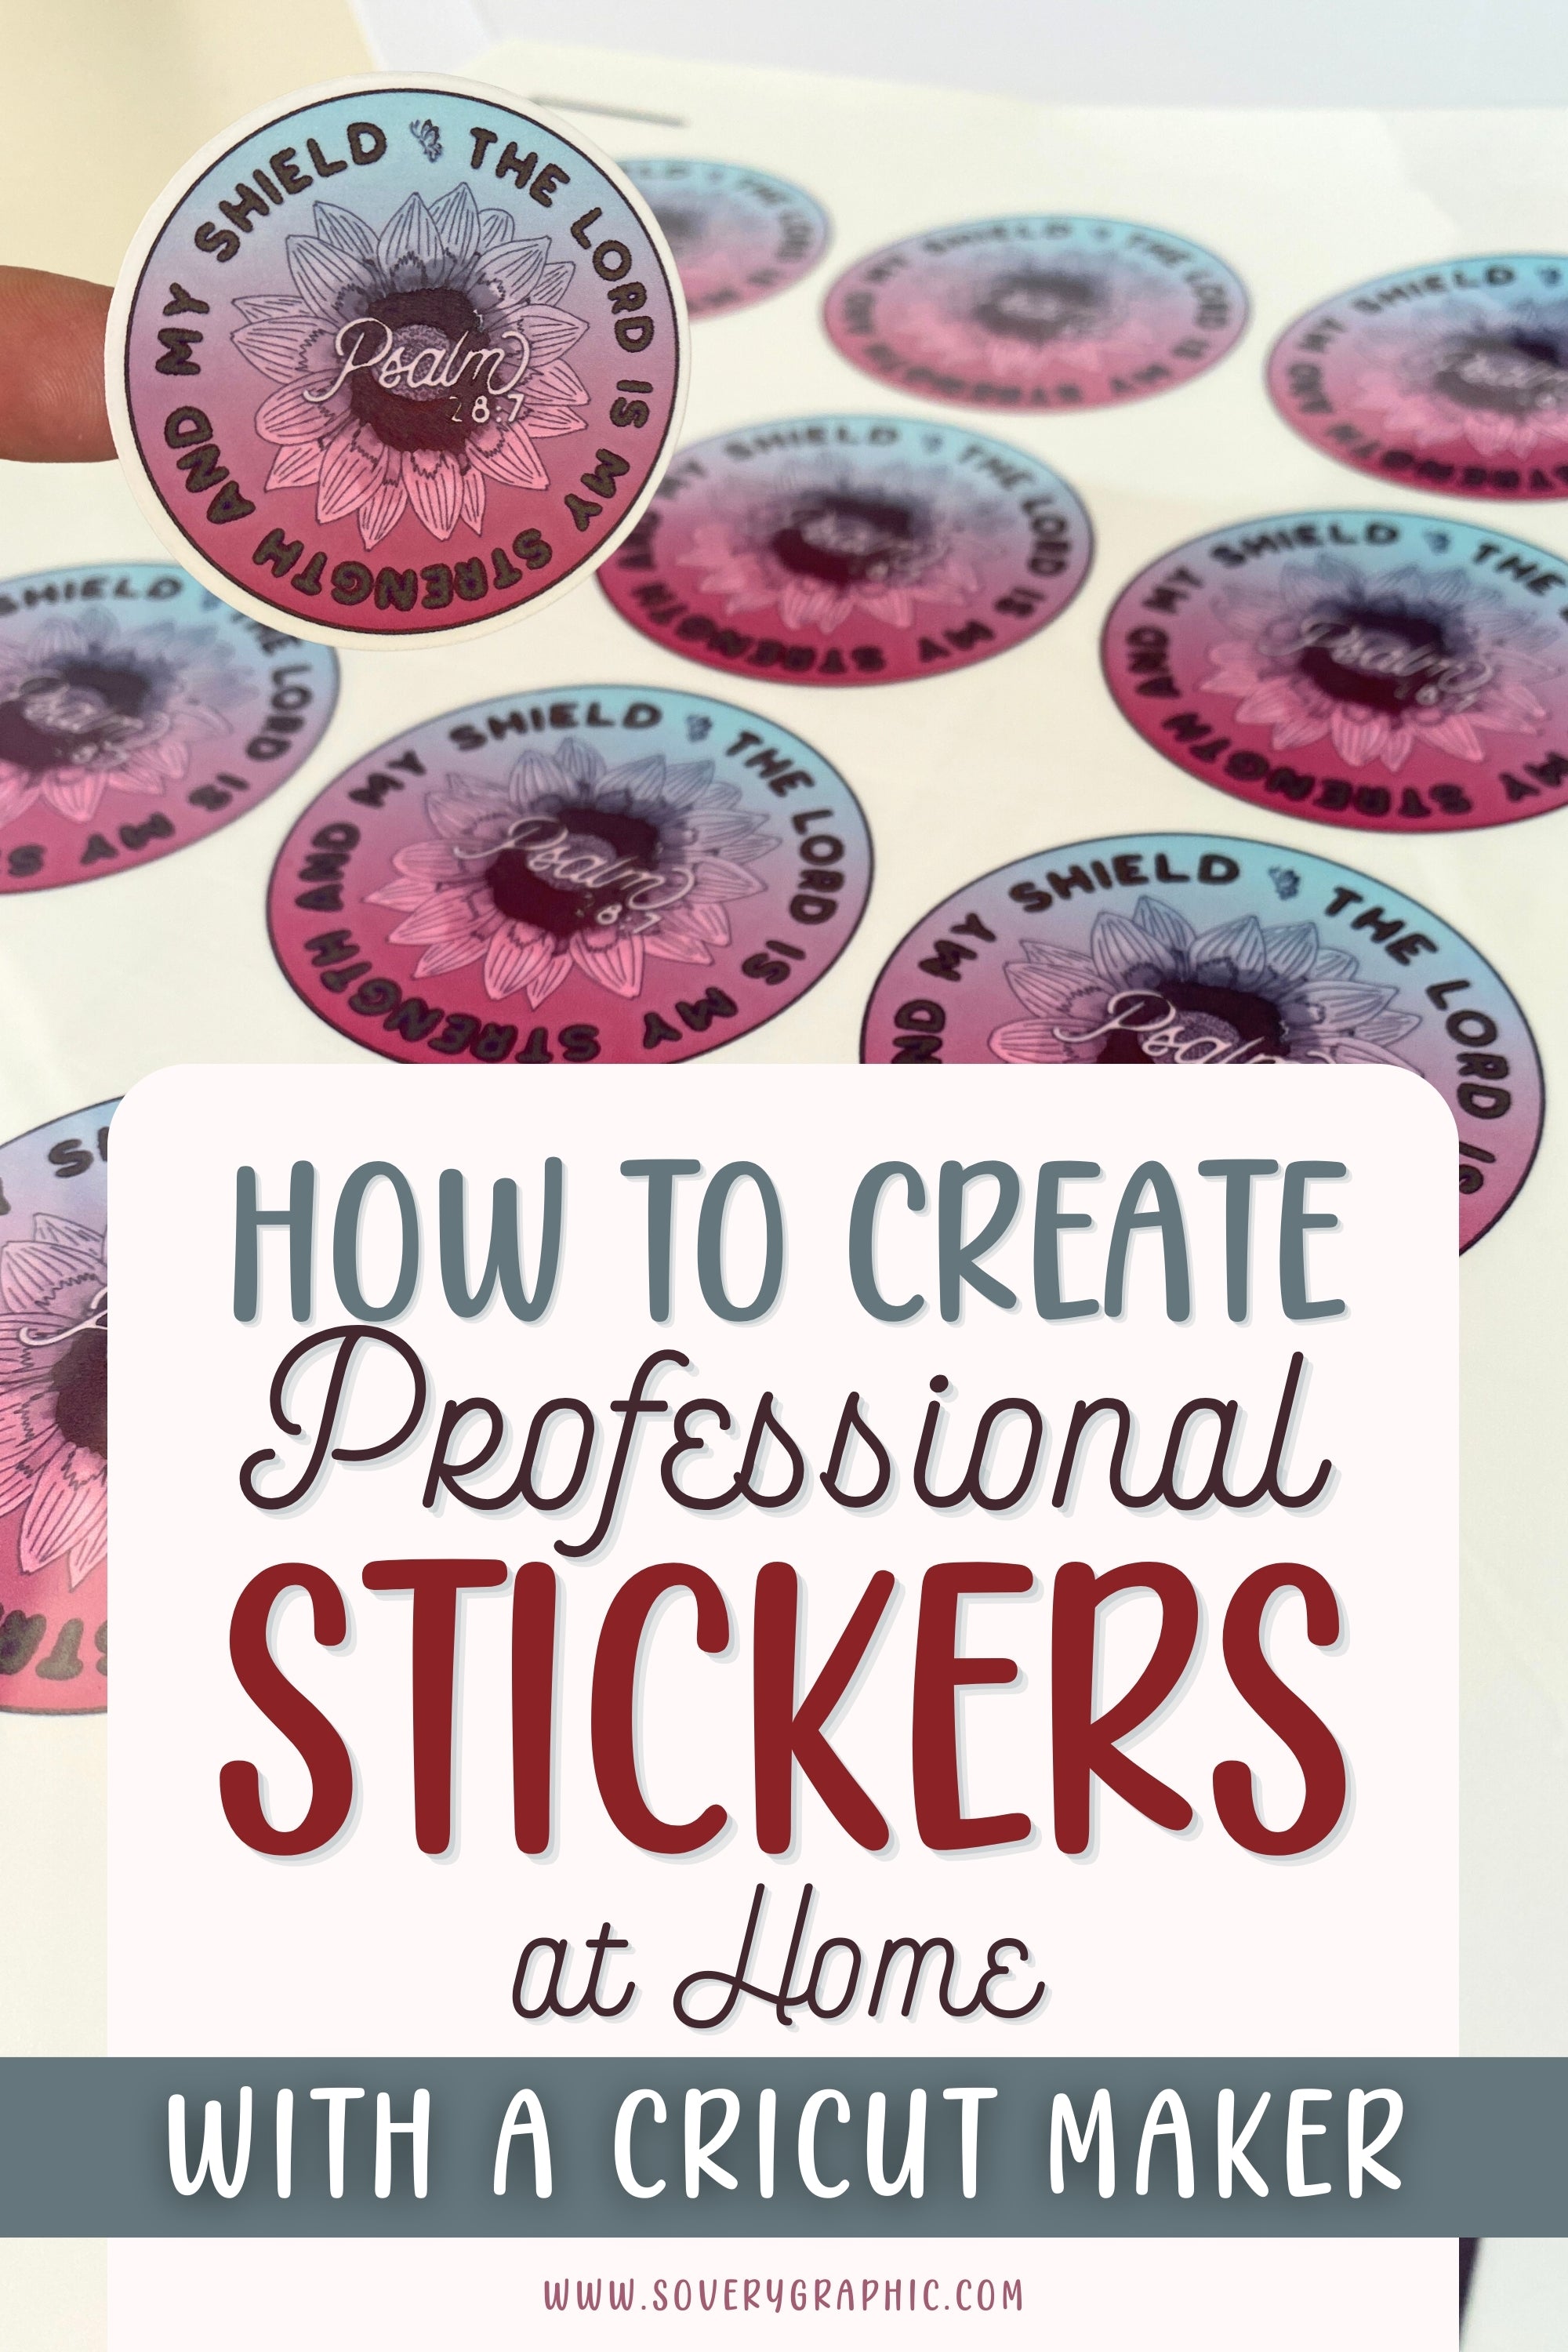 How to Create Professional Stickers at Home with a Cricut Maker from So Very Graphic Designs